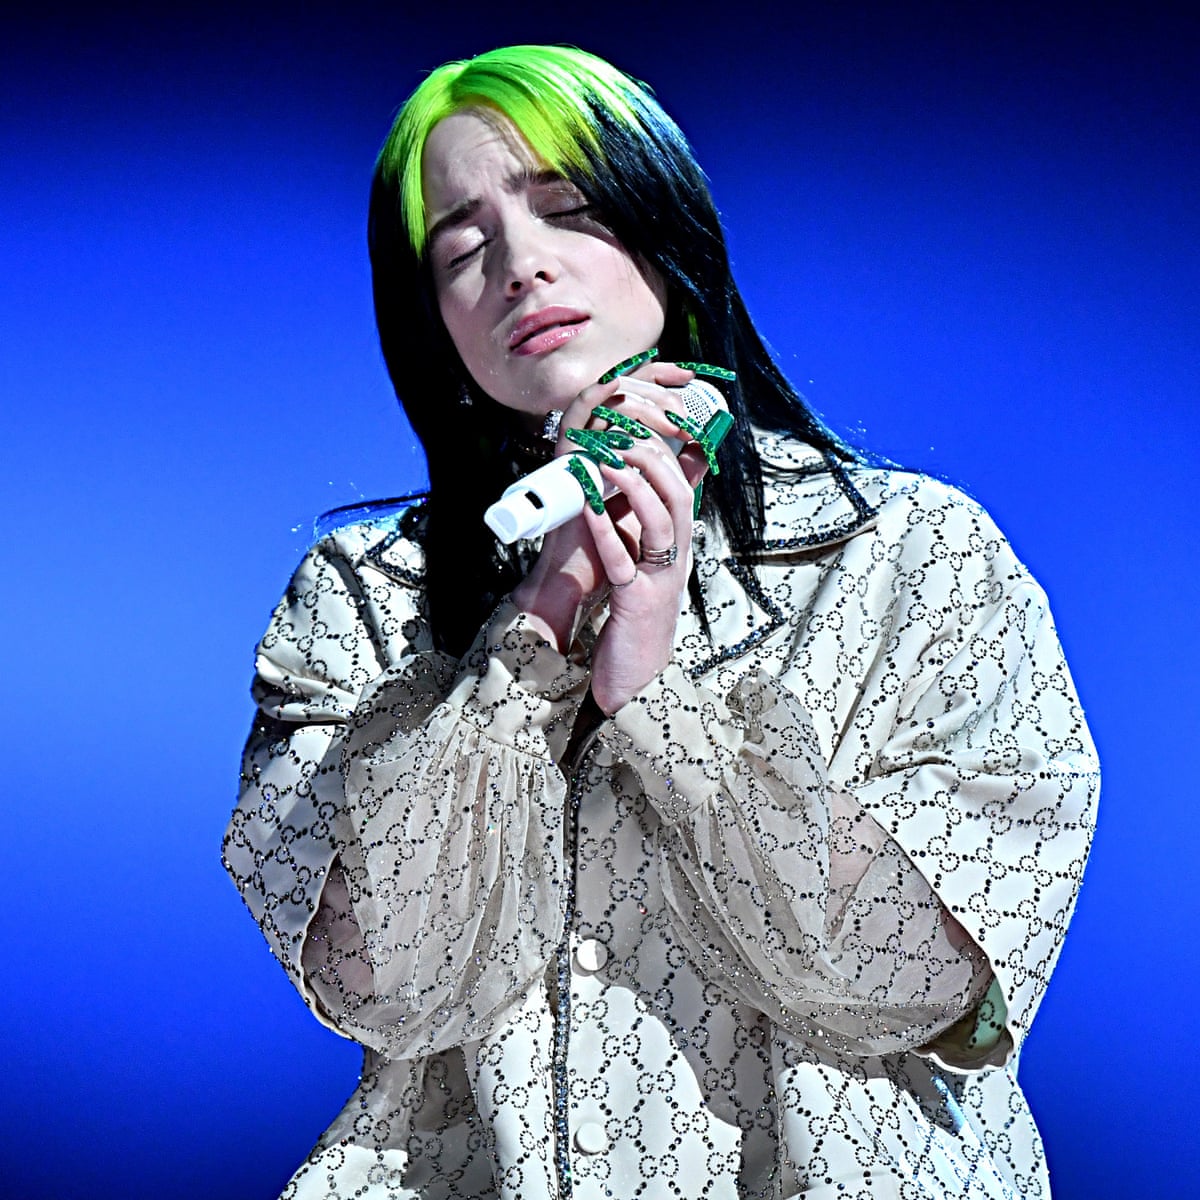 Everything We Wanted The Race To Find The Next Billie Eilish